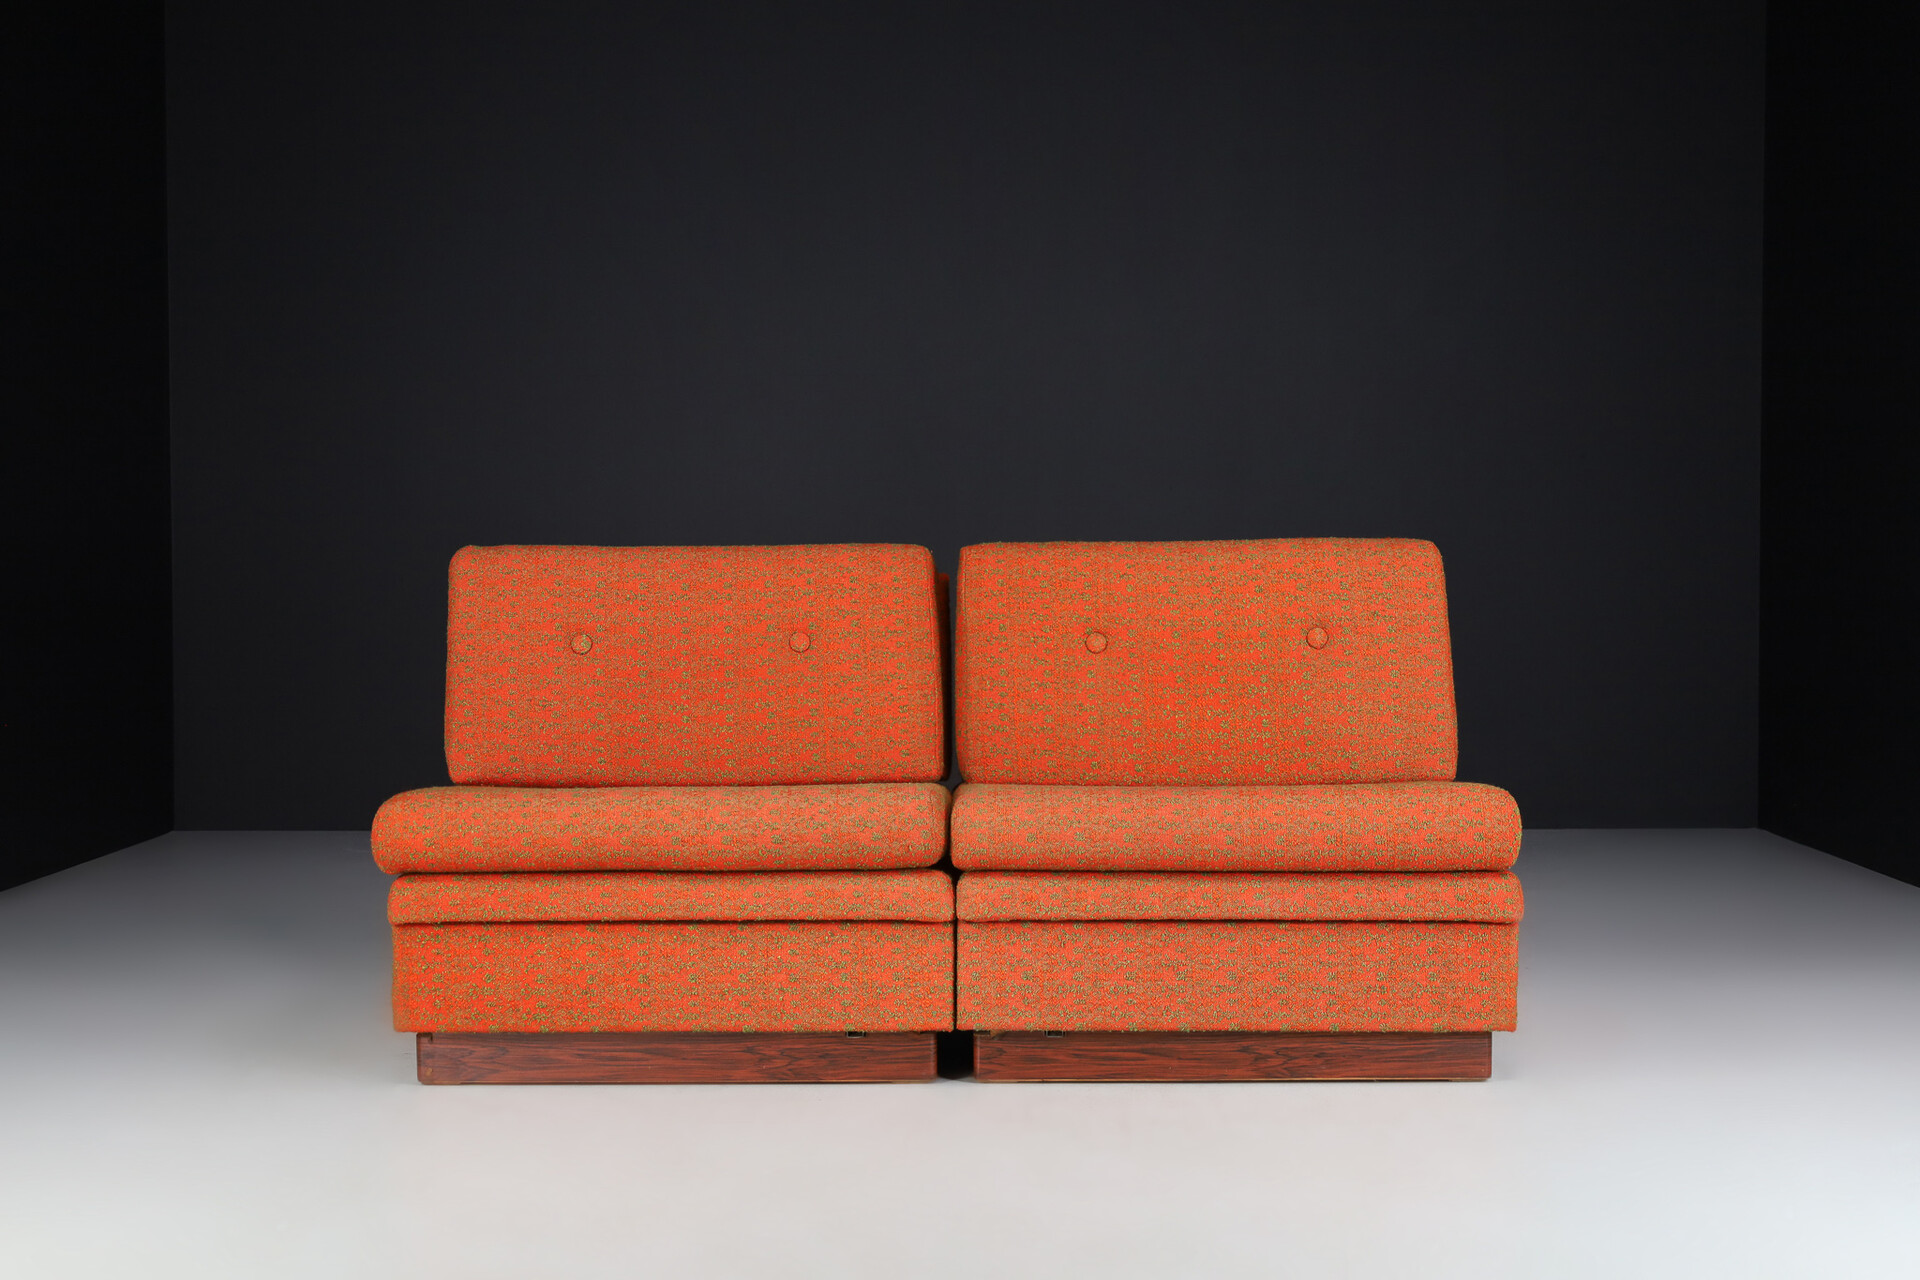 Mid century modern Lounge Chairs / Bed in original fabric , Germany 1960s Mid-20th century